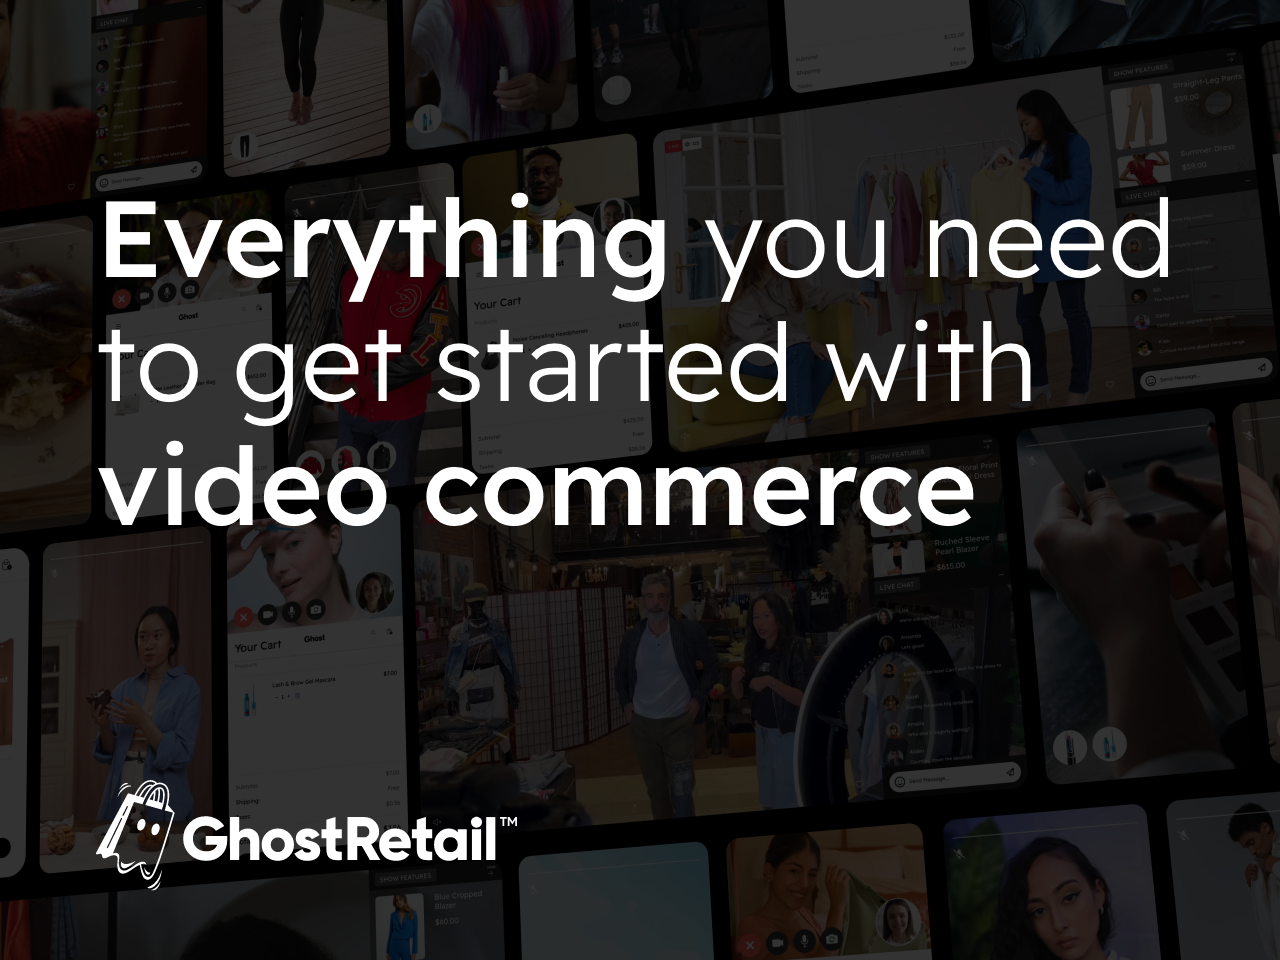 Get started with video commerce fast with Ghost's solutions, including free shoppable video, livestream shopping, and 1:1 live personal shopping.